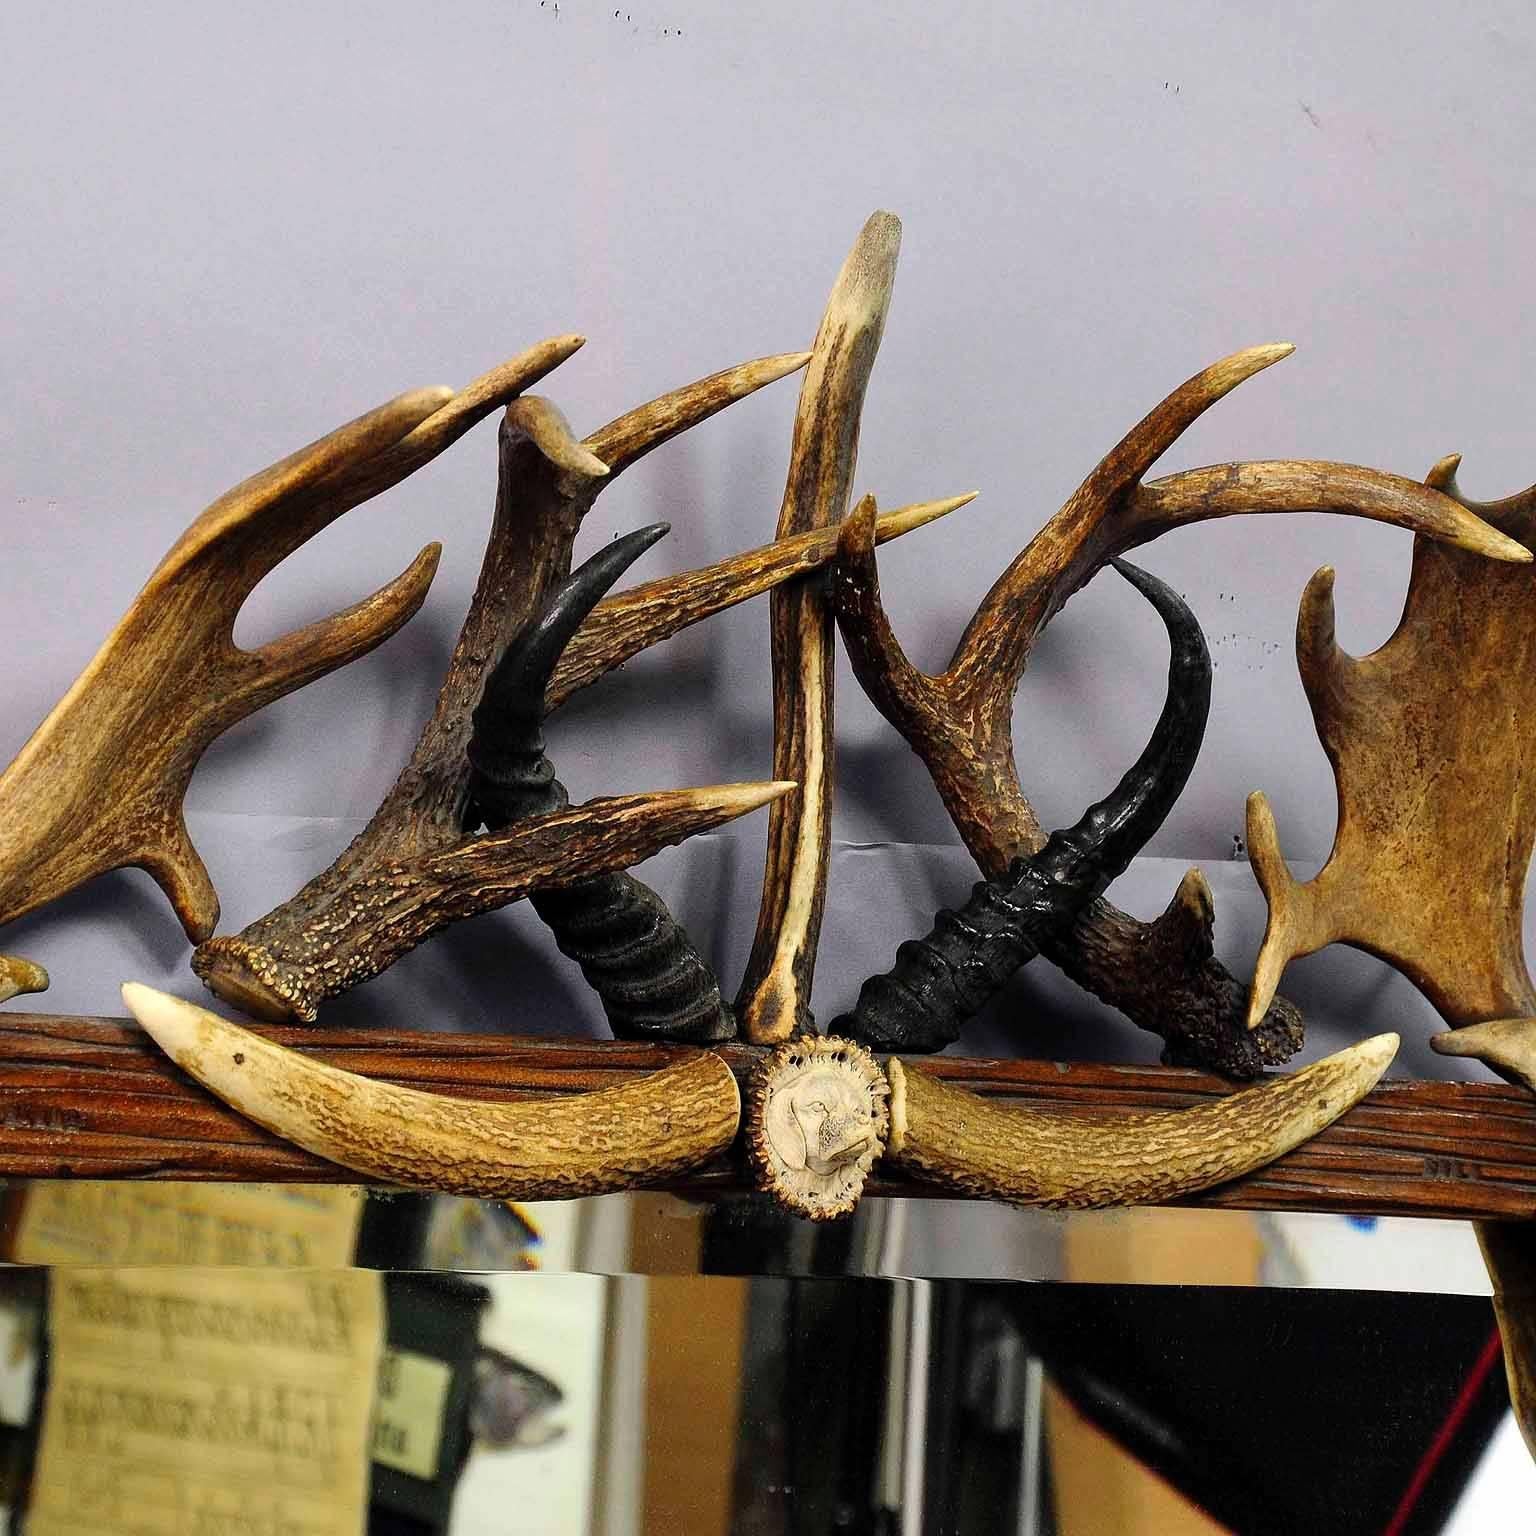 Carved Antique Antler Frame with Rustic Antler Decorations and Mirror